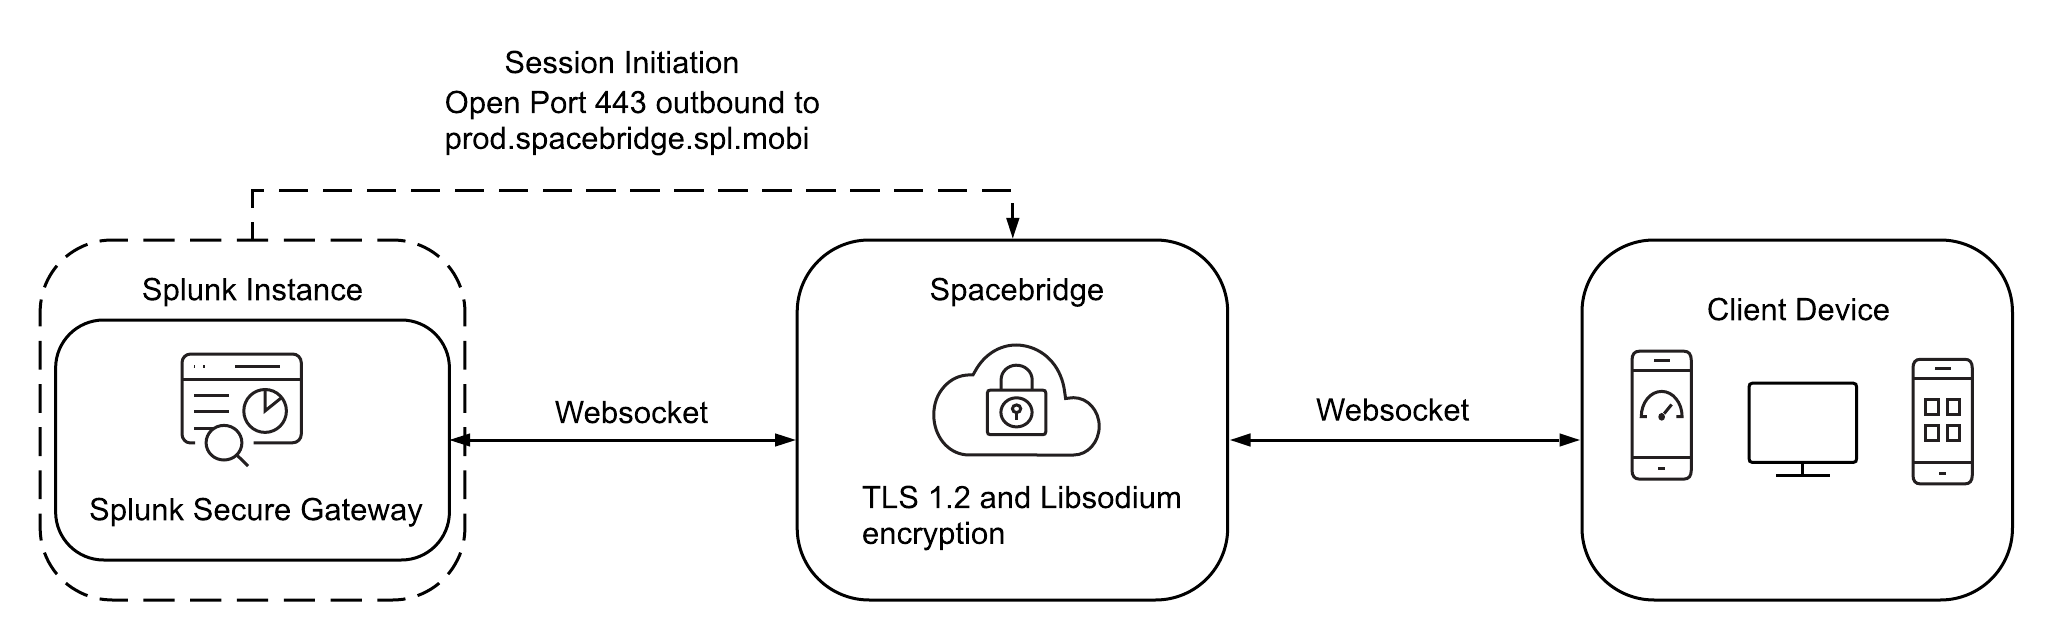 This diagram shows the bidirectional communication between mobile devices and the Splunk Secure Gateway app, with Spacebridge in between as an intermediary message router.